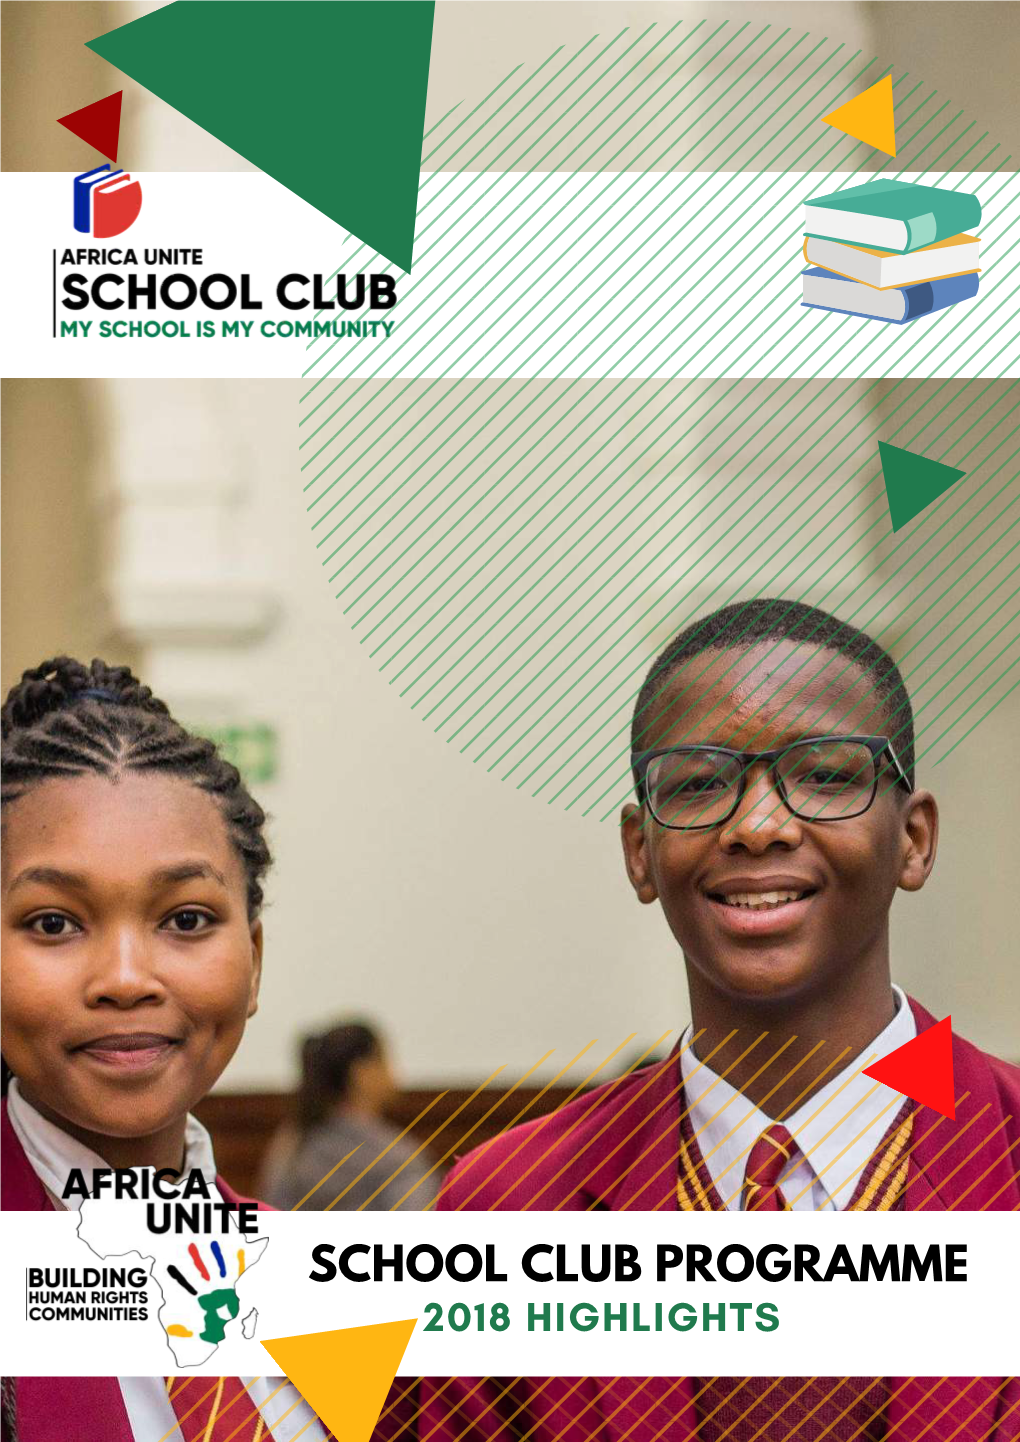 Africa Unite Initiated the School Club Programme with the Slogan ‘My School Is My Community’